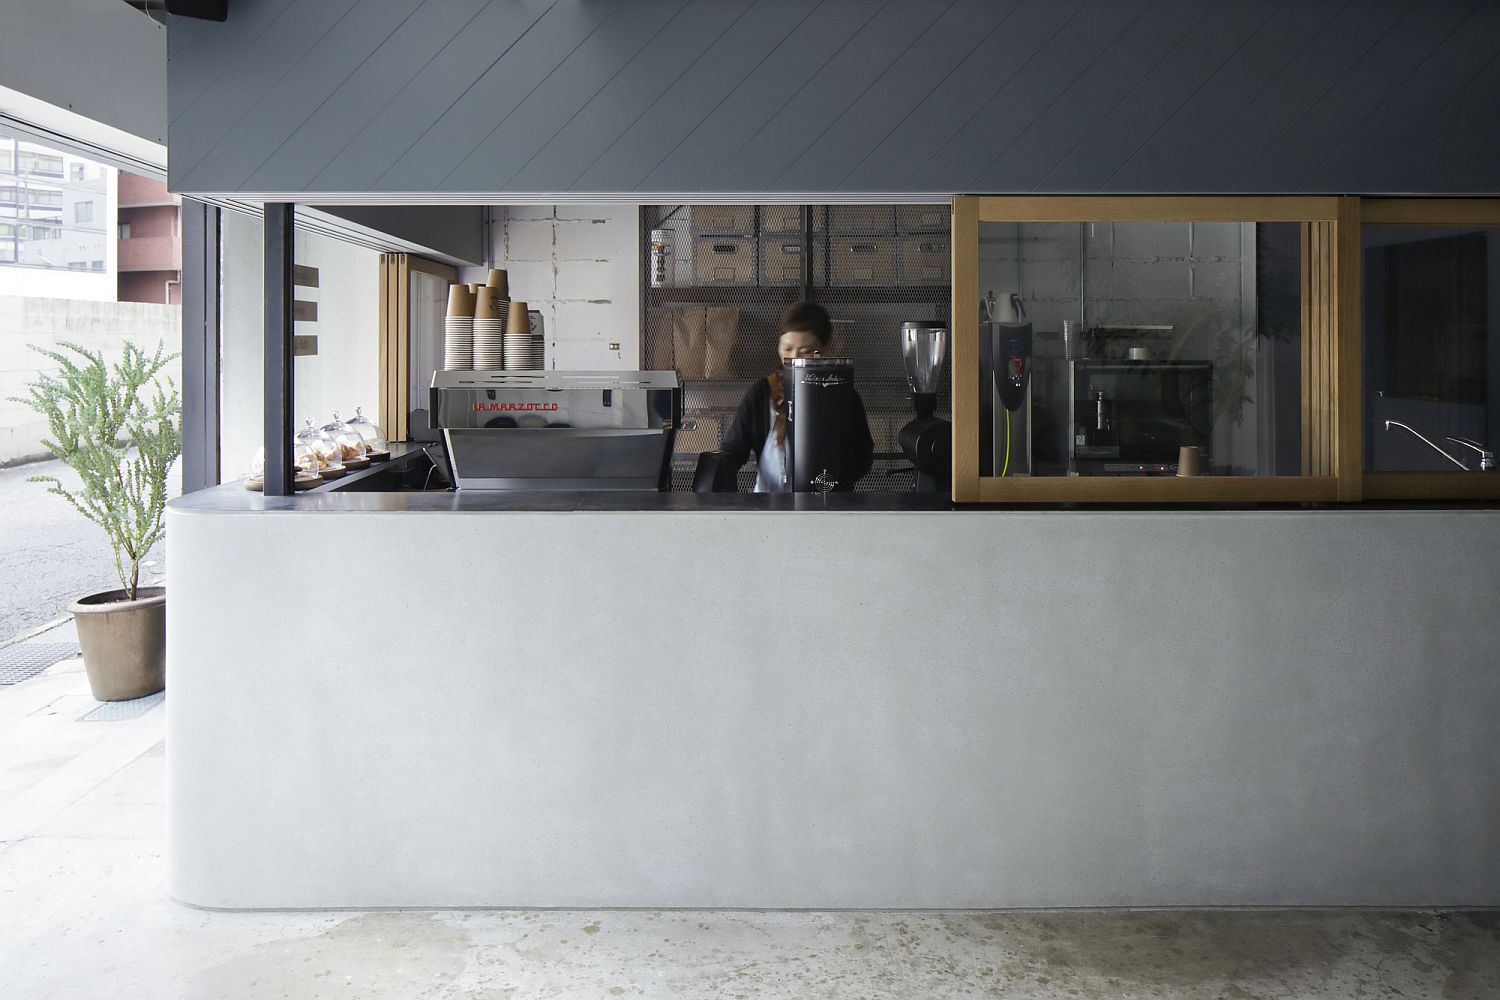 Simple and unassuming design of the coffee shop with white and blue interior